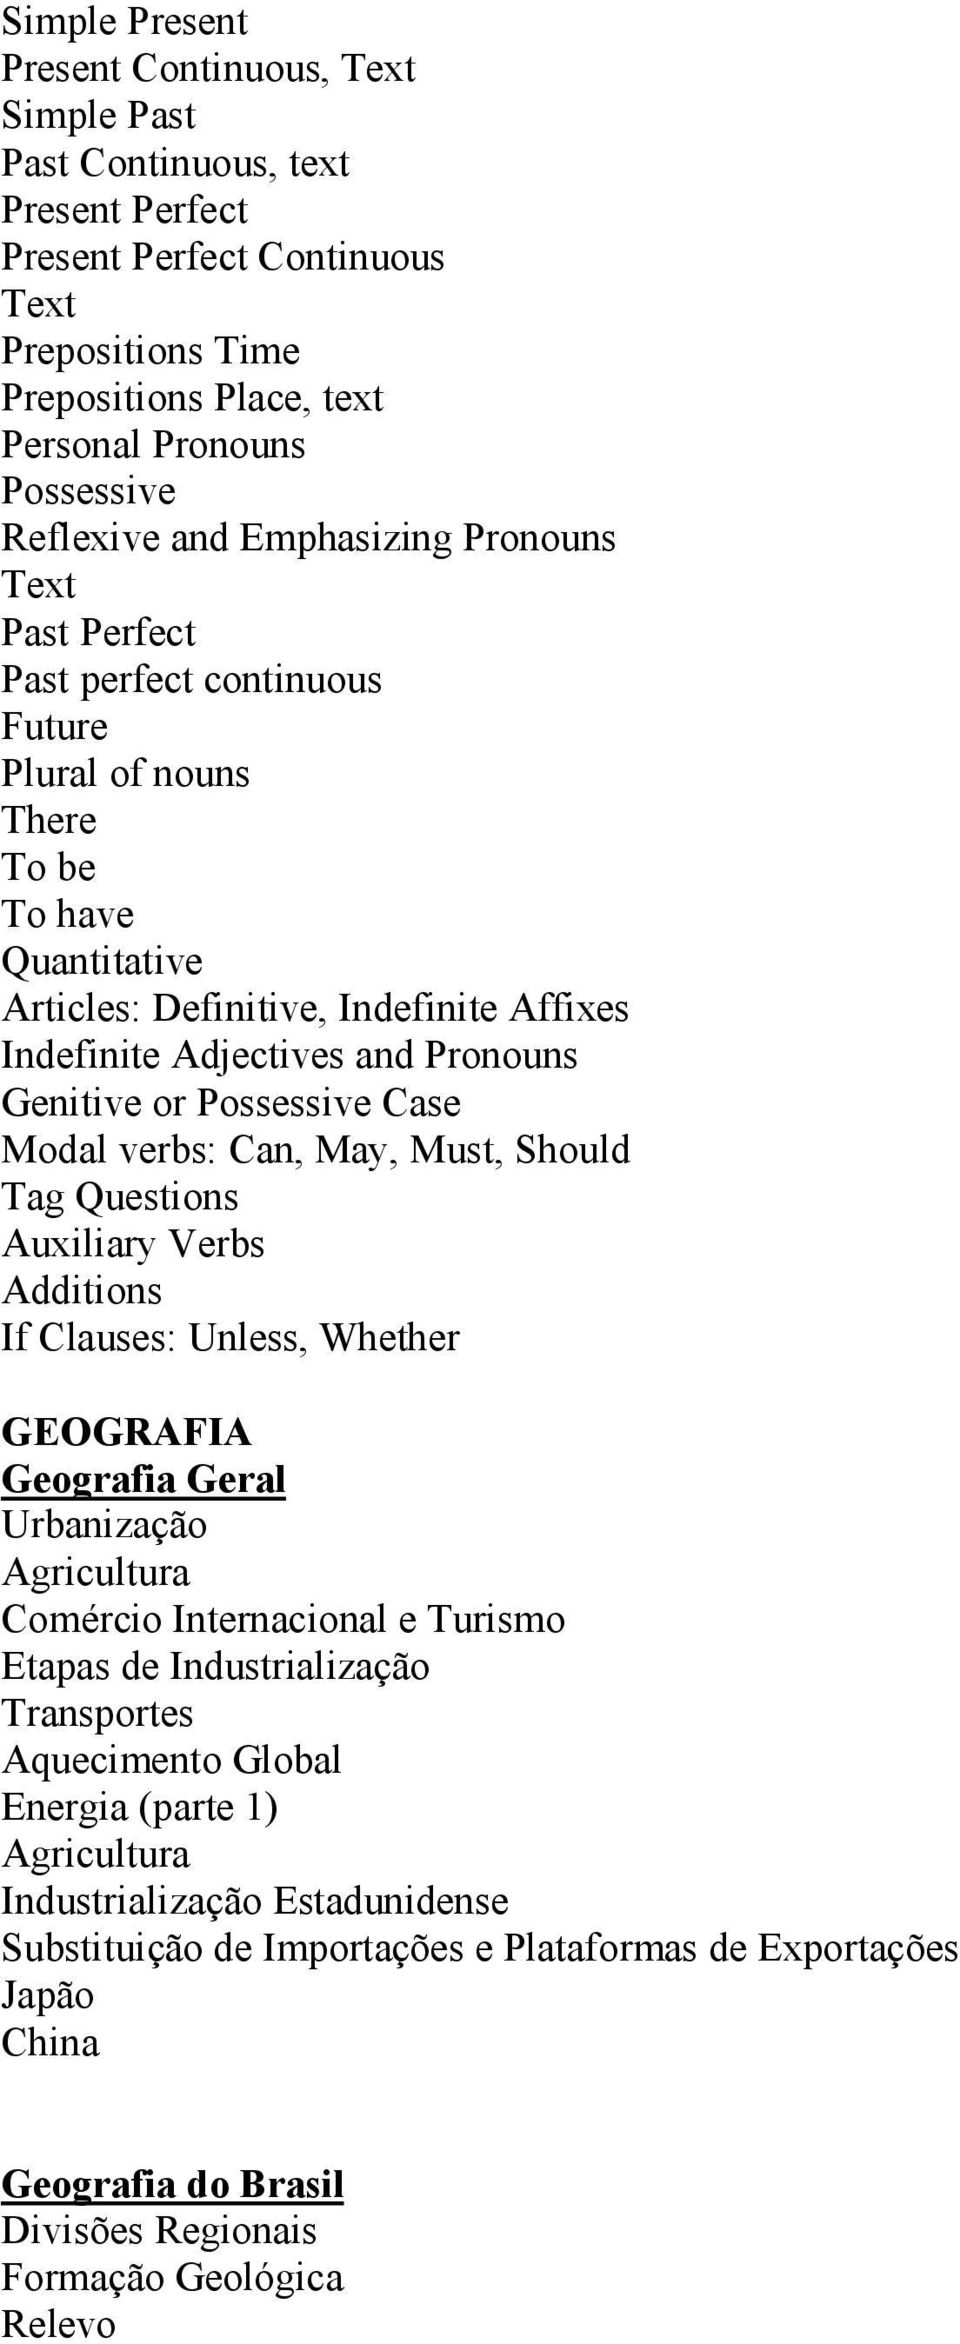 Pronouns Genitive or Possessive Case Modal verbs: Can, May, Must, Should Tag Questions Auxiliary Verbs Additions If Clauses: Unless, Whether GEOGRAFIA Geografia Geral Urbanização Agricultura Comércio